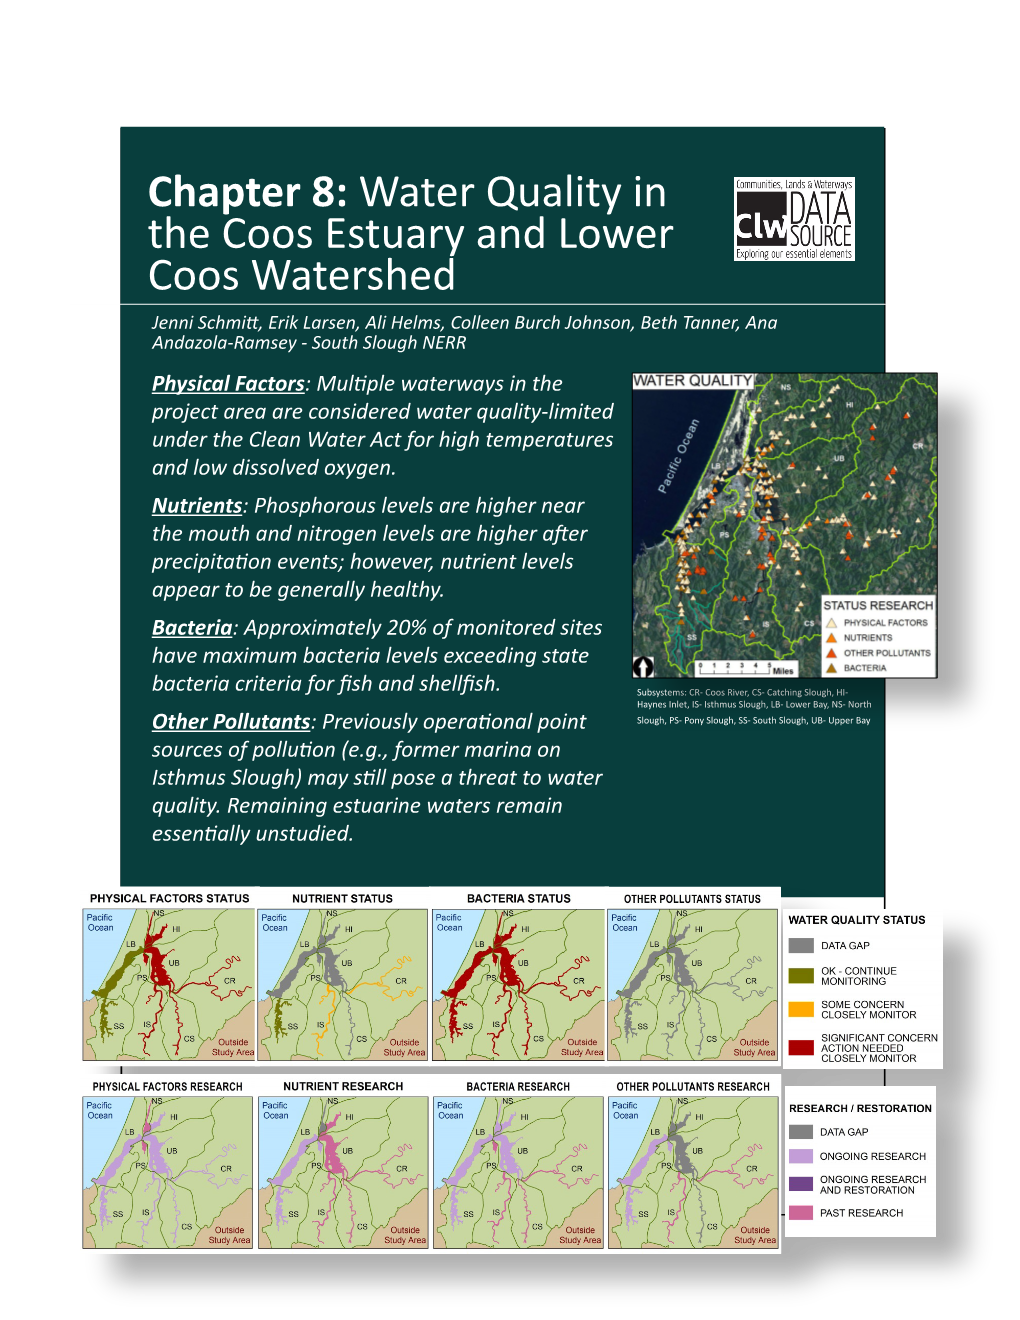 Chapter 8: Water Quality in the Coos Estuary and Lower Coos Watershed